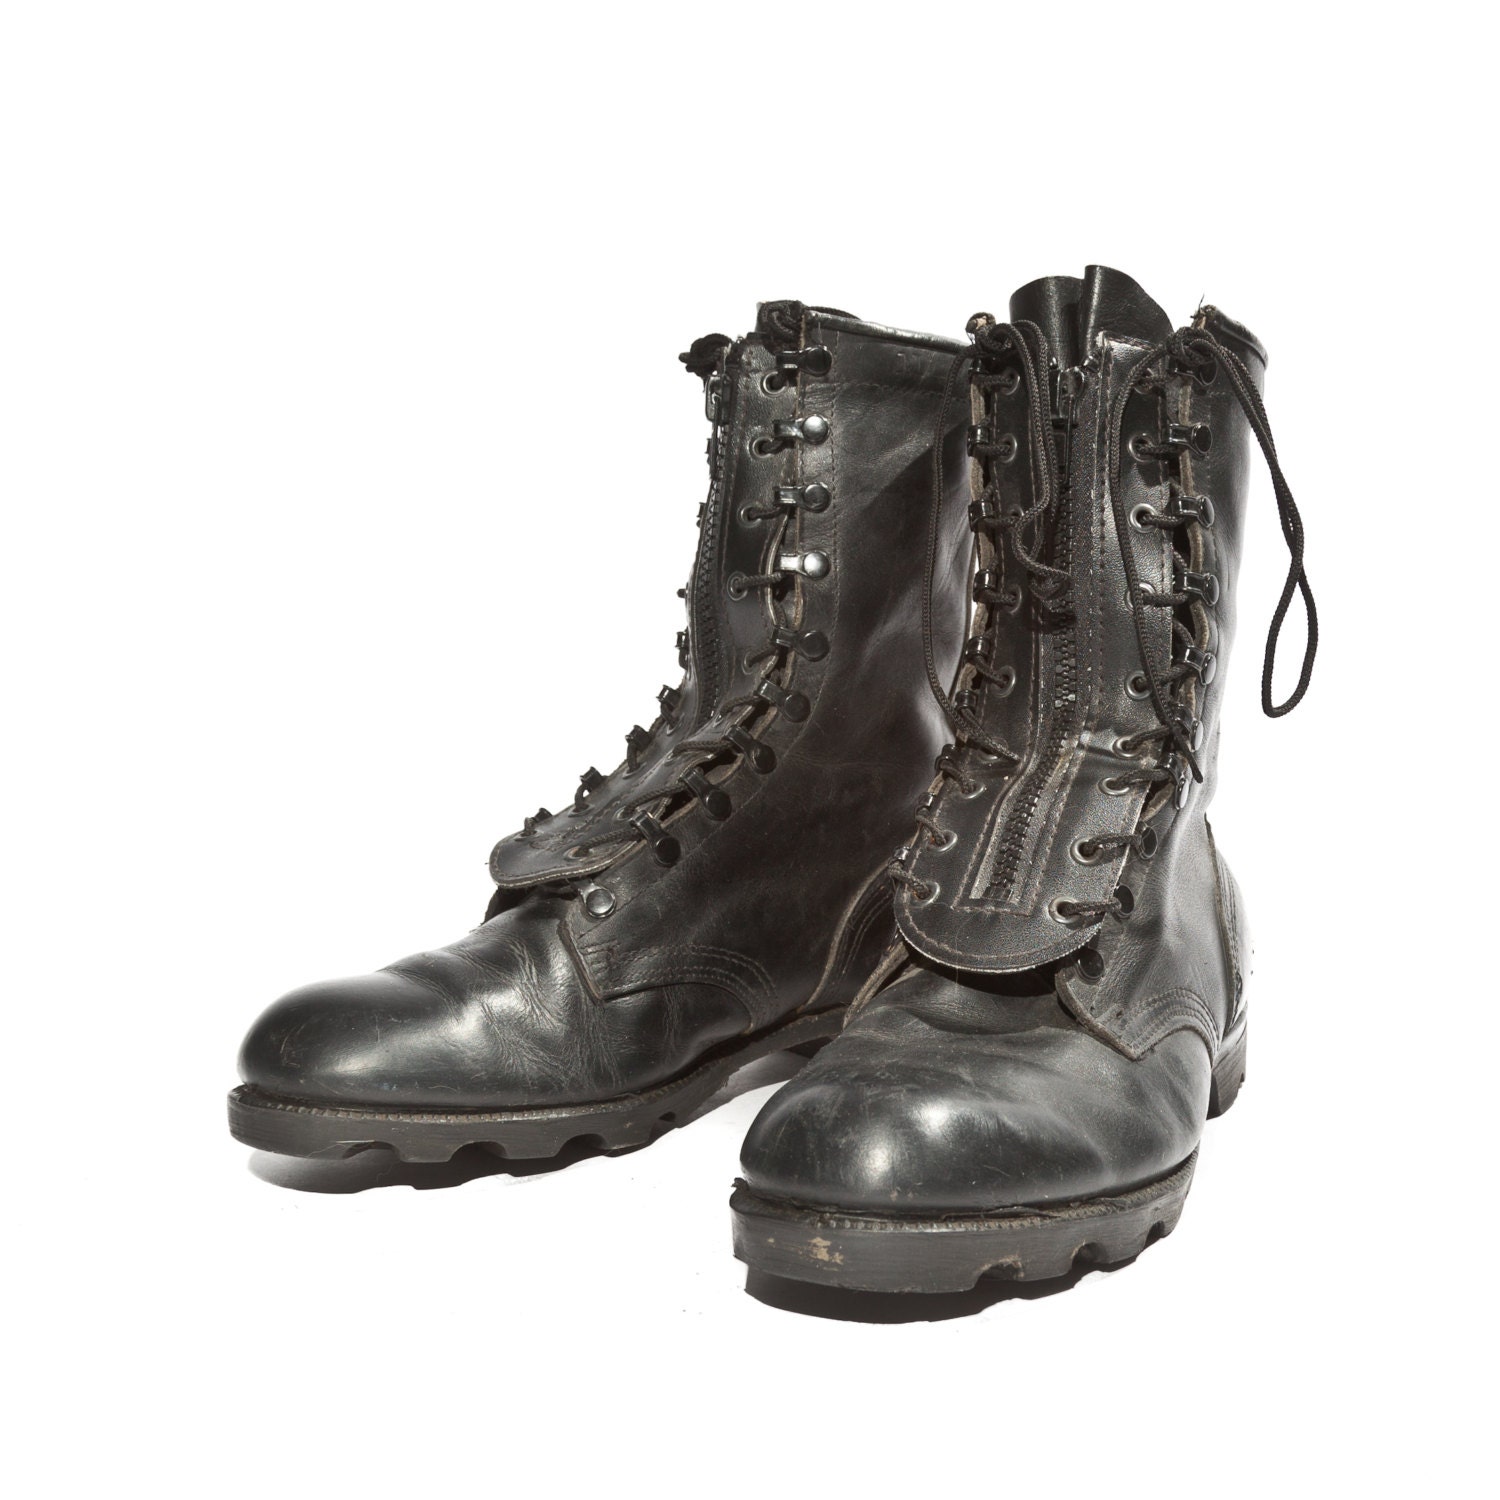 Men's Vintage Combat Boots Military Standard Issue by NashDryGoods